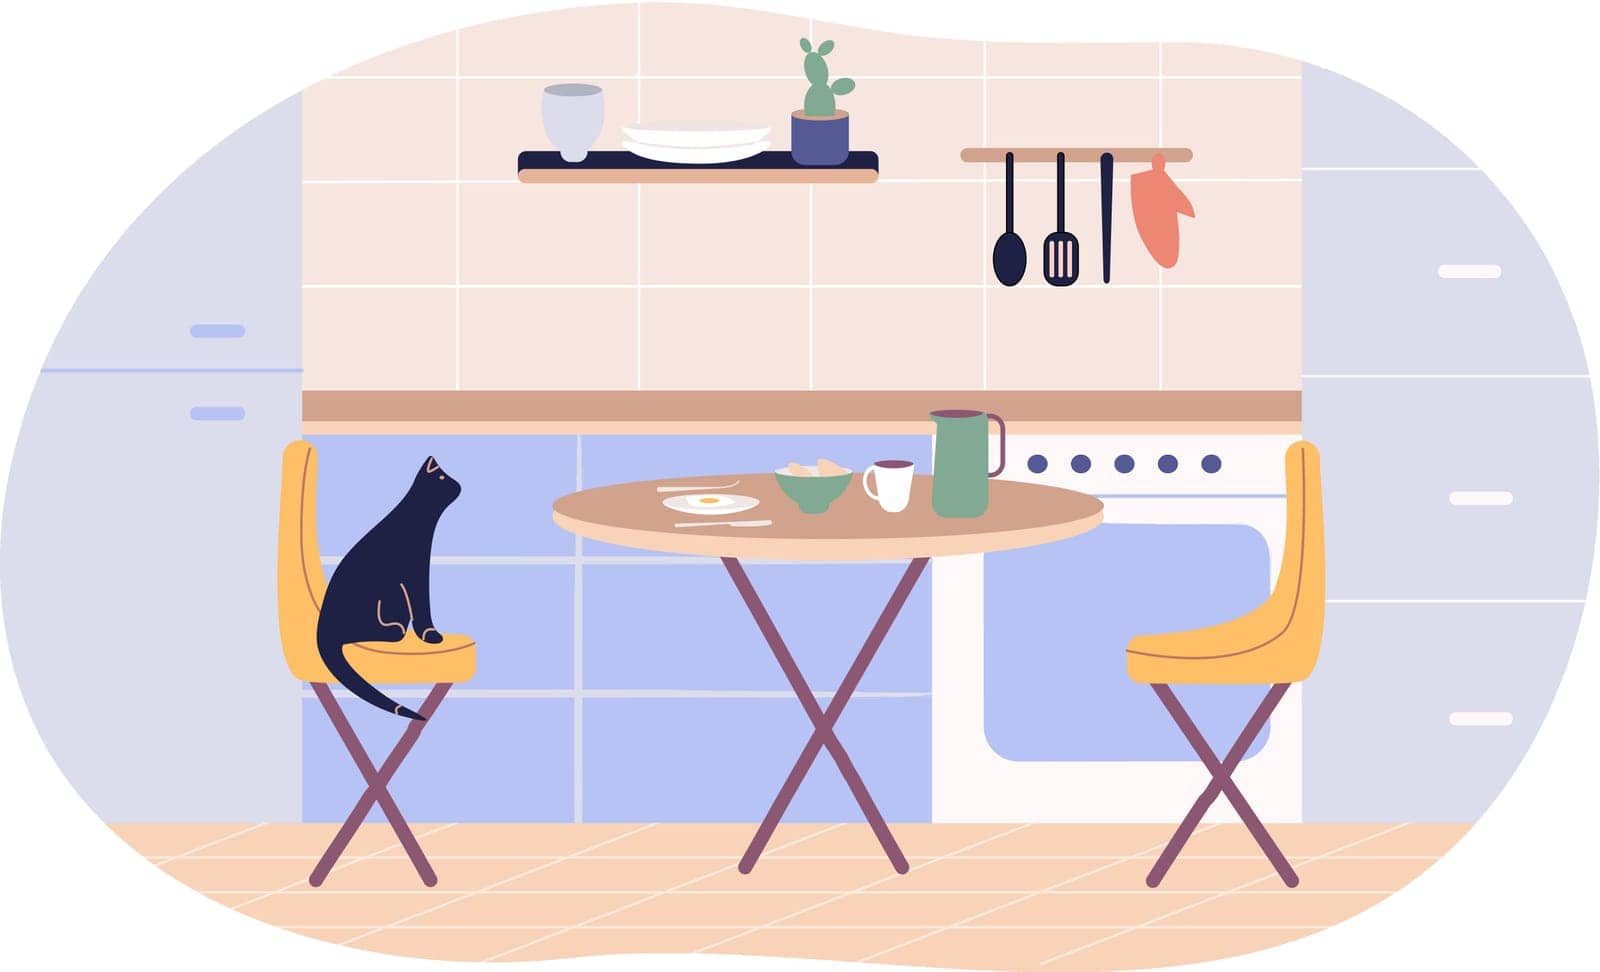 Kitchen room, breakfast on the table, a cat sitting on a chair. Daily routines by ircydraw